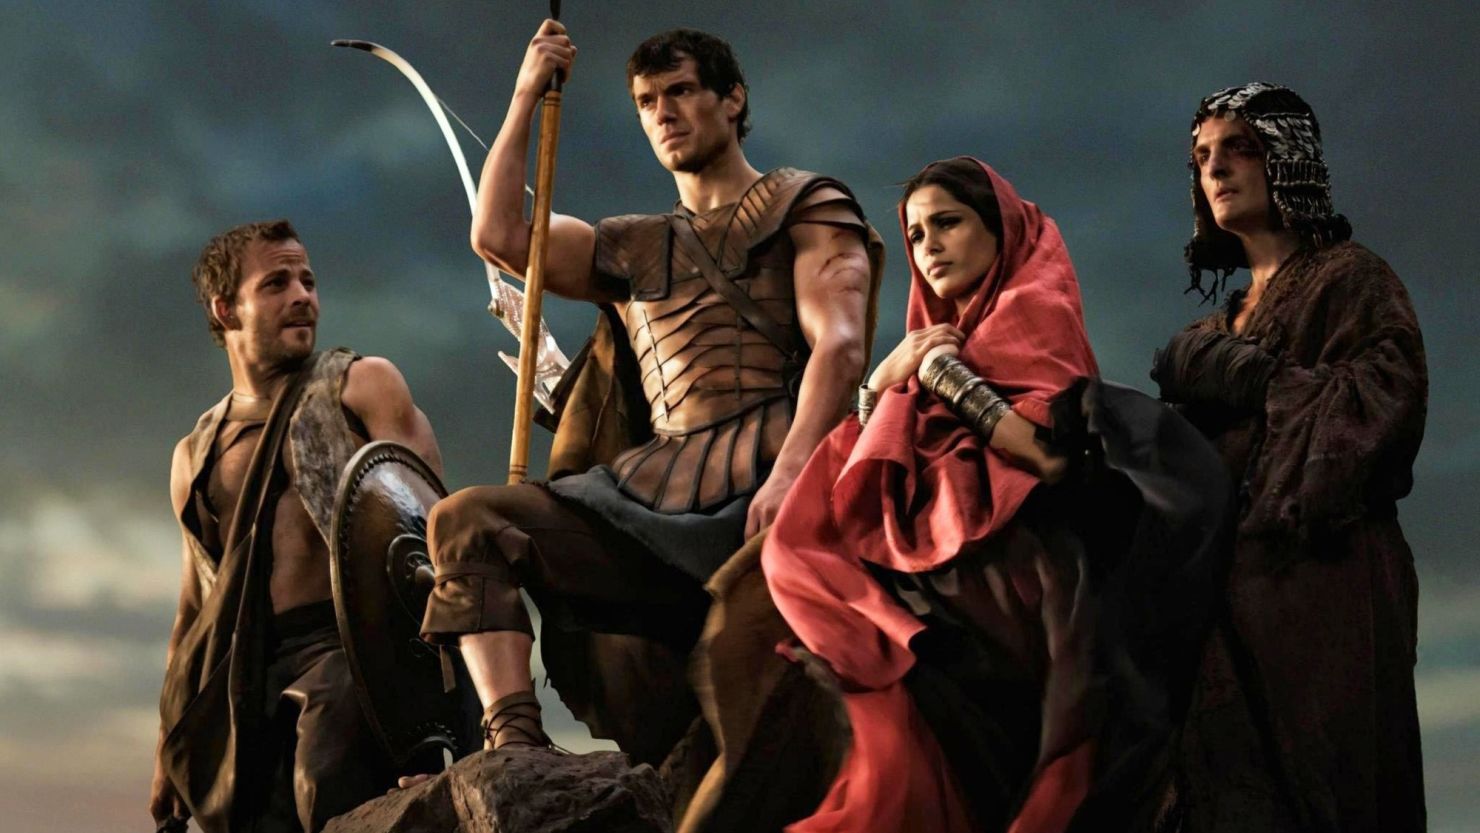 Actor Henry Cavill joins other stars in the new film "Immortals."